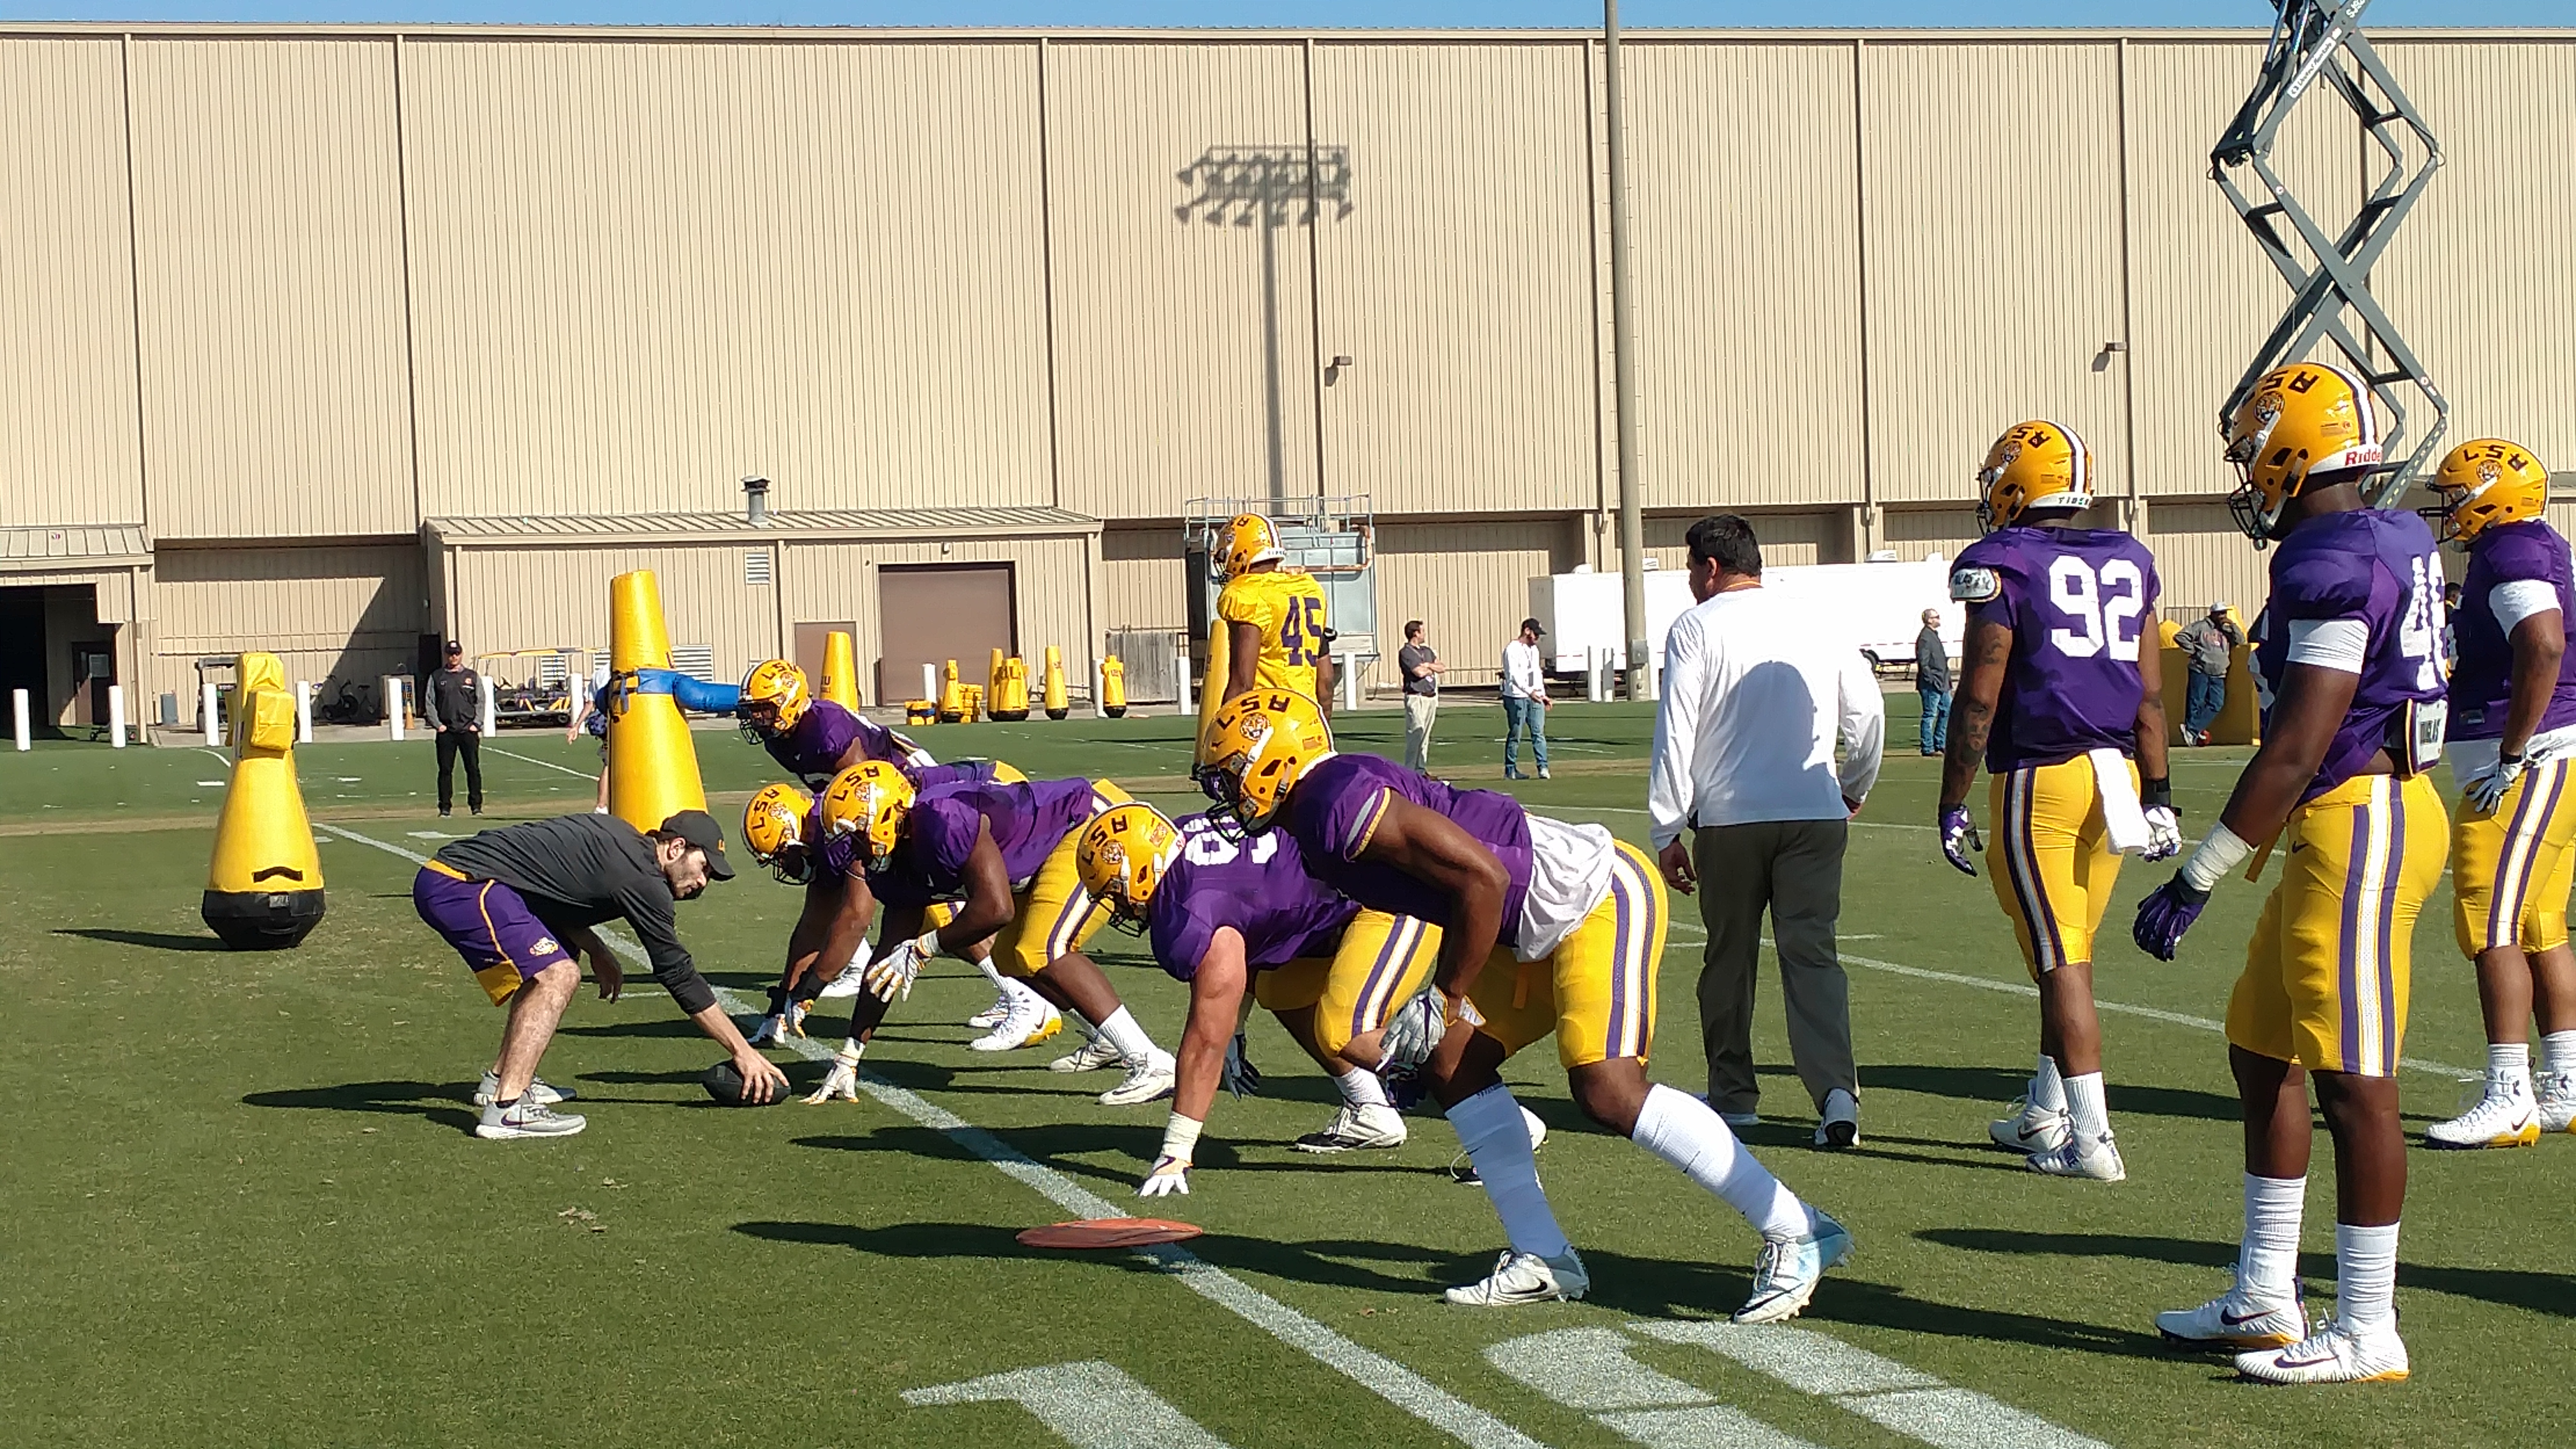 LSU’s First Practice in Full Pads for the 2018-19 Season